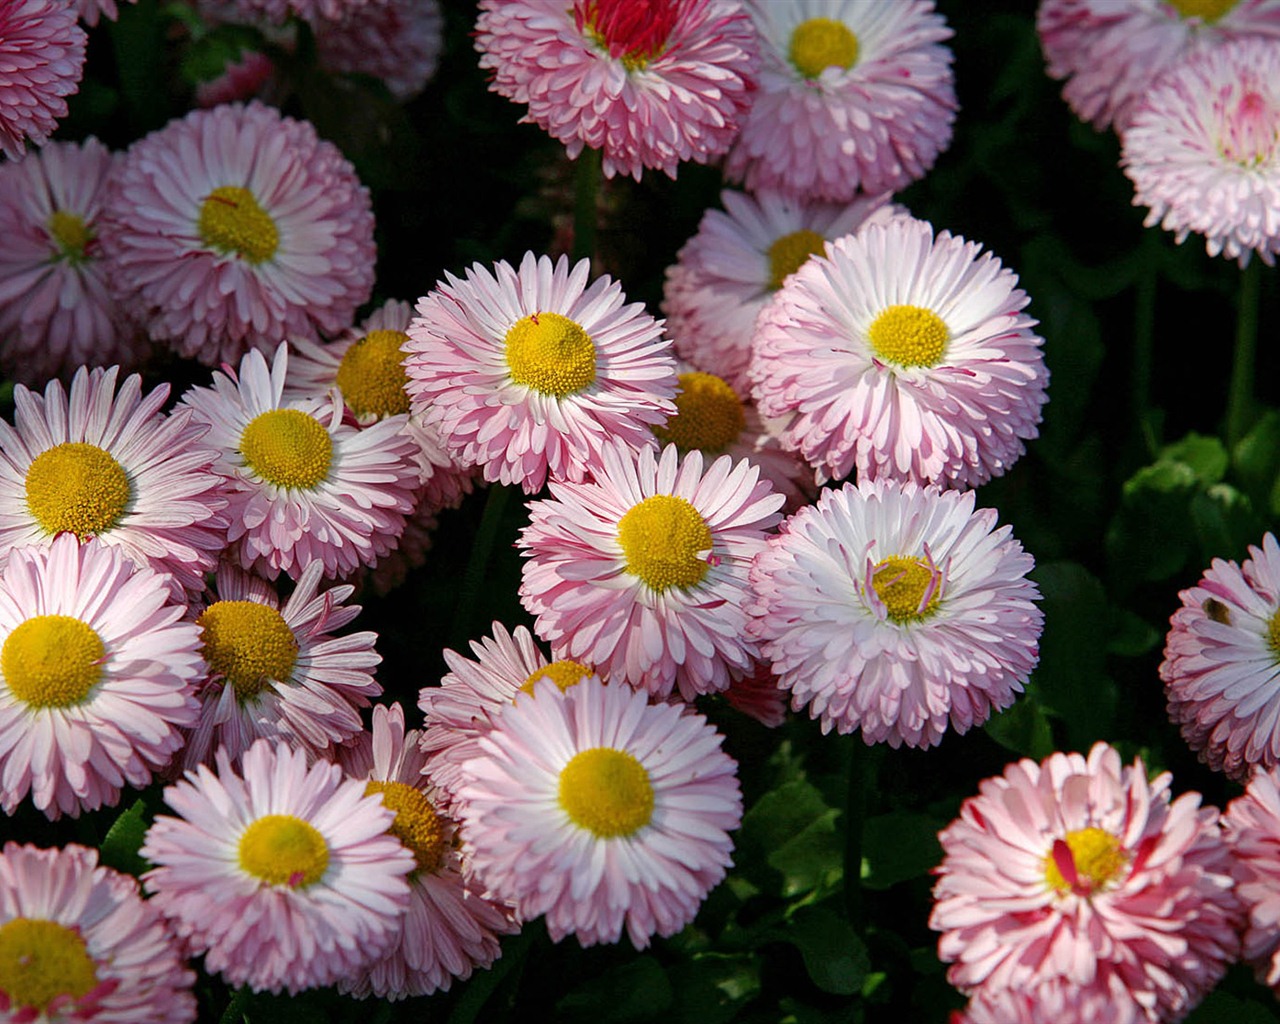 Daisies flowers close-up HD wallpapers #15 - 1280x1024